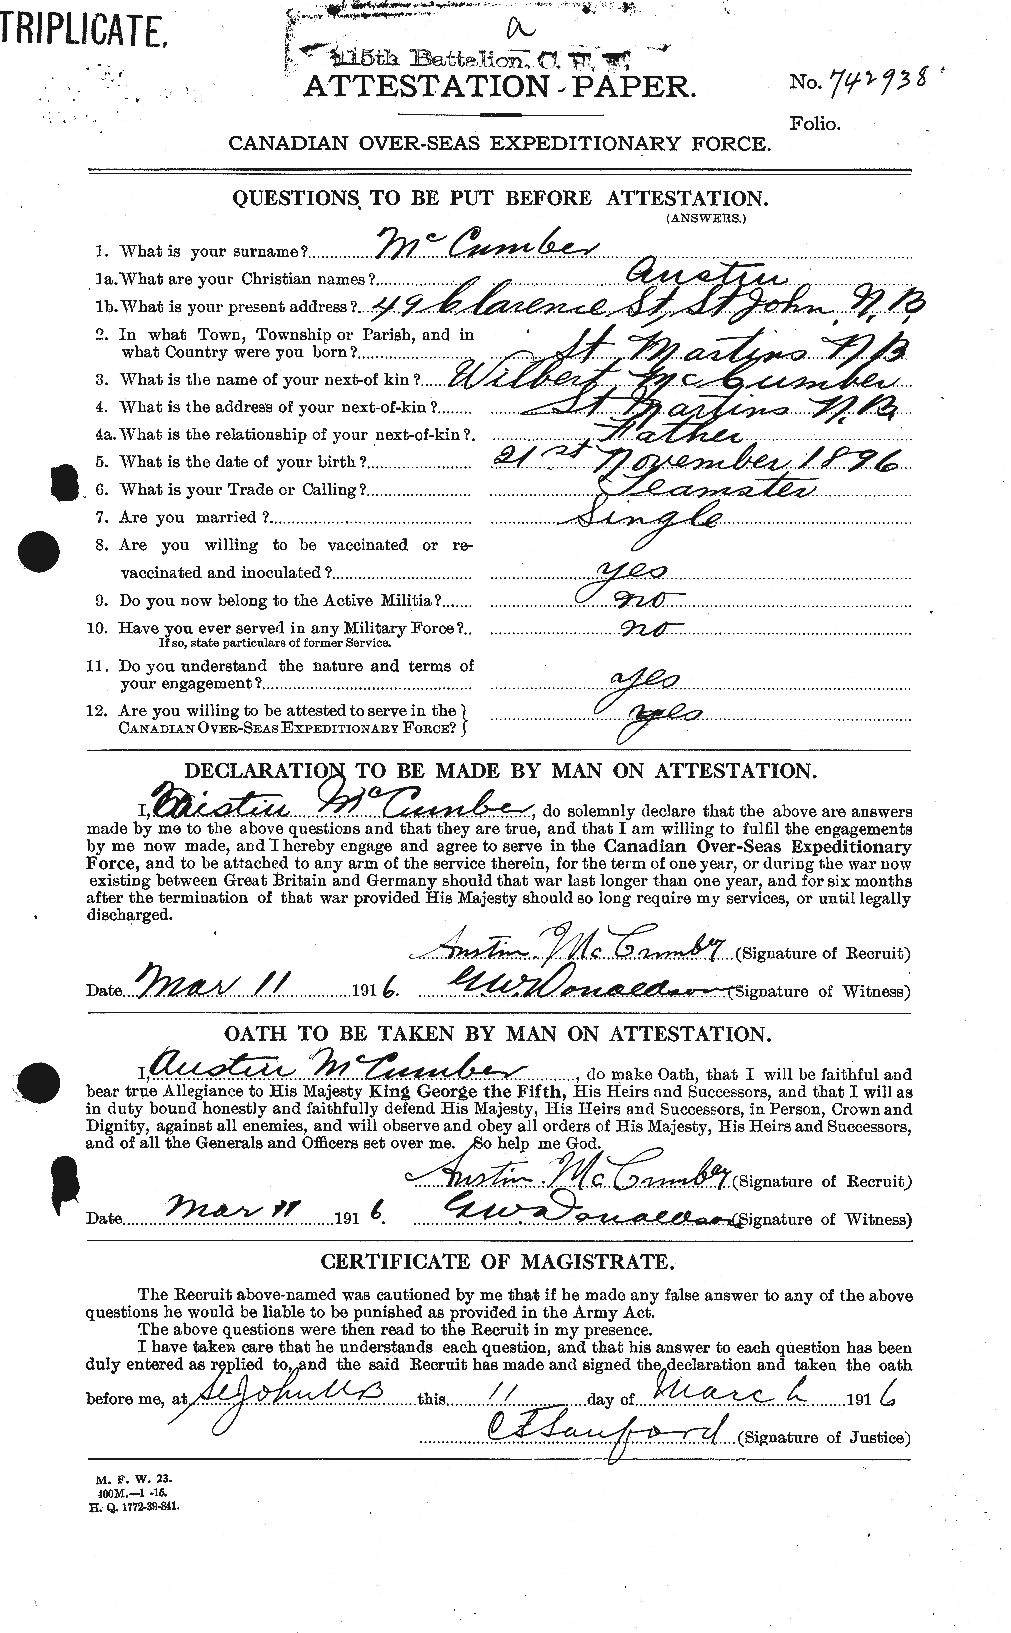 Personnel Records of the First World War - CEF 136812a